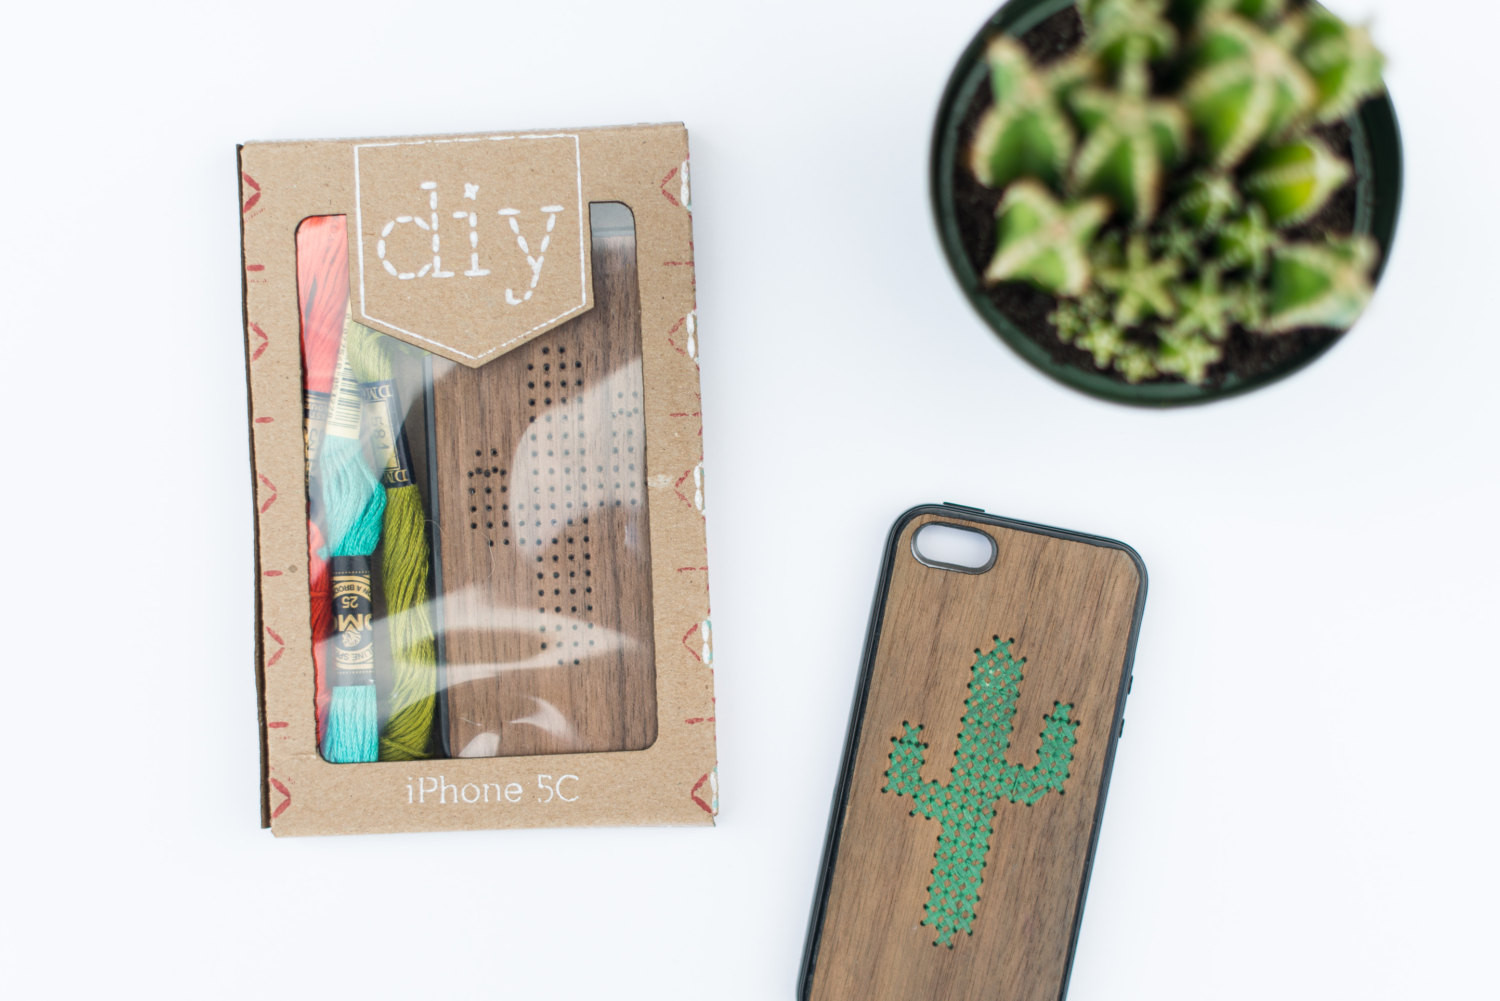 DIY Iphone Case Kit
 diy embroidery iphone case kit by SavvieStudio on Etsy